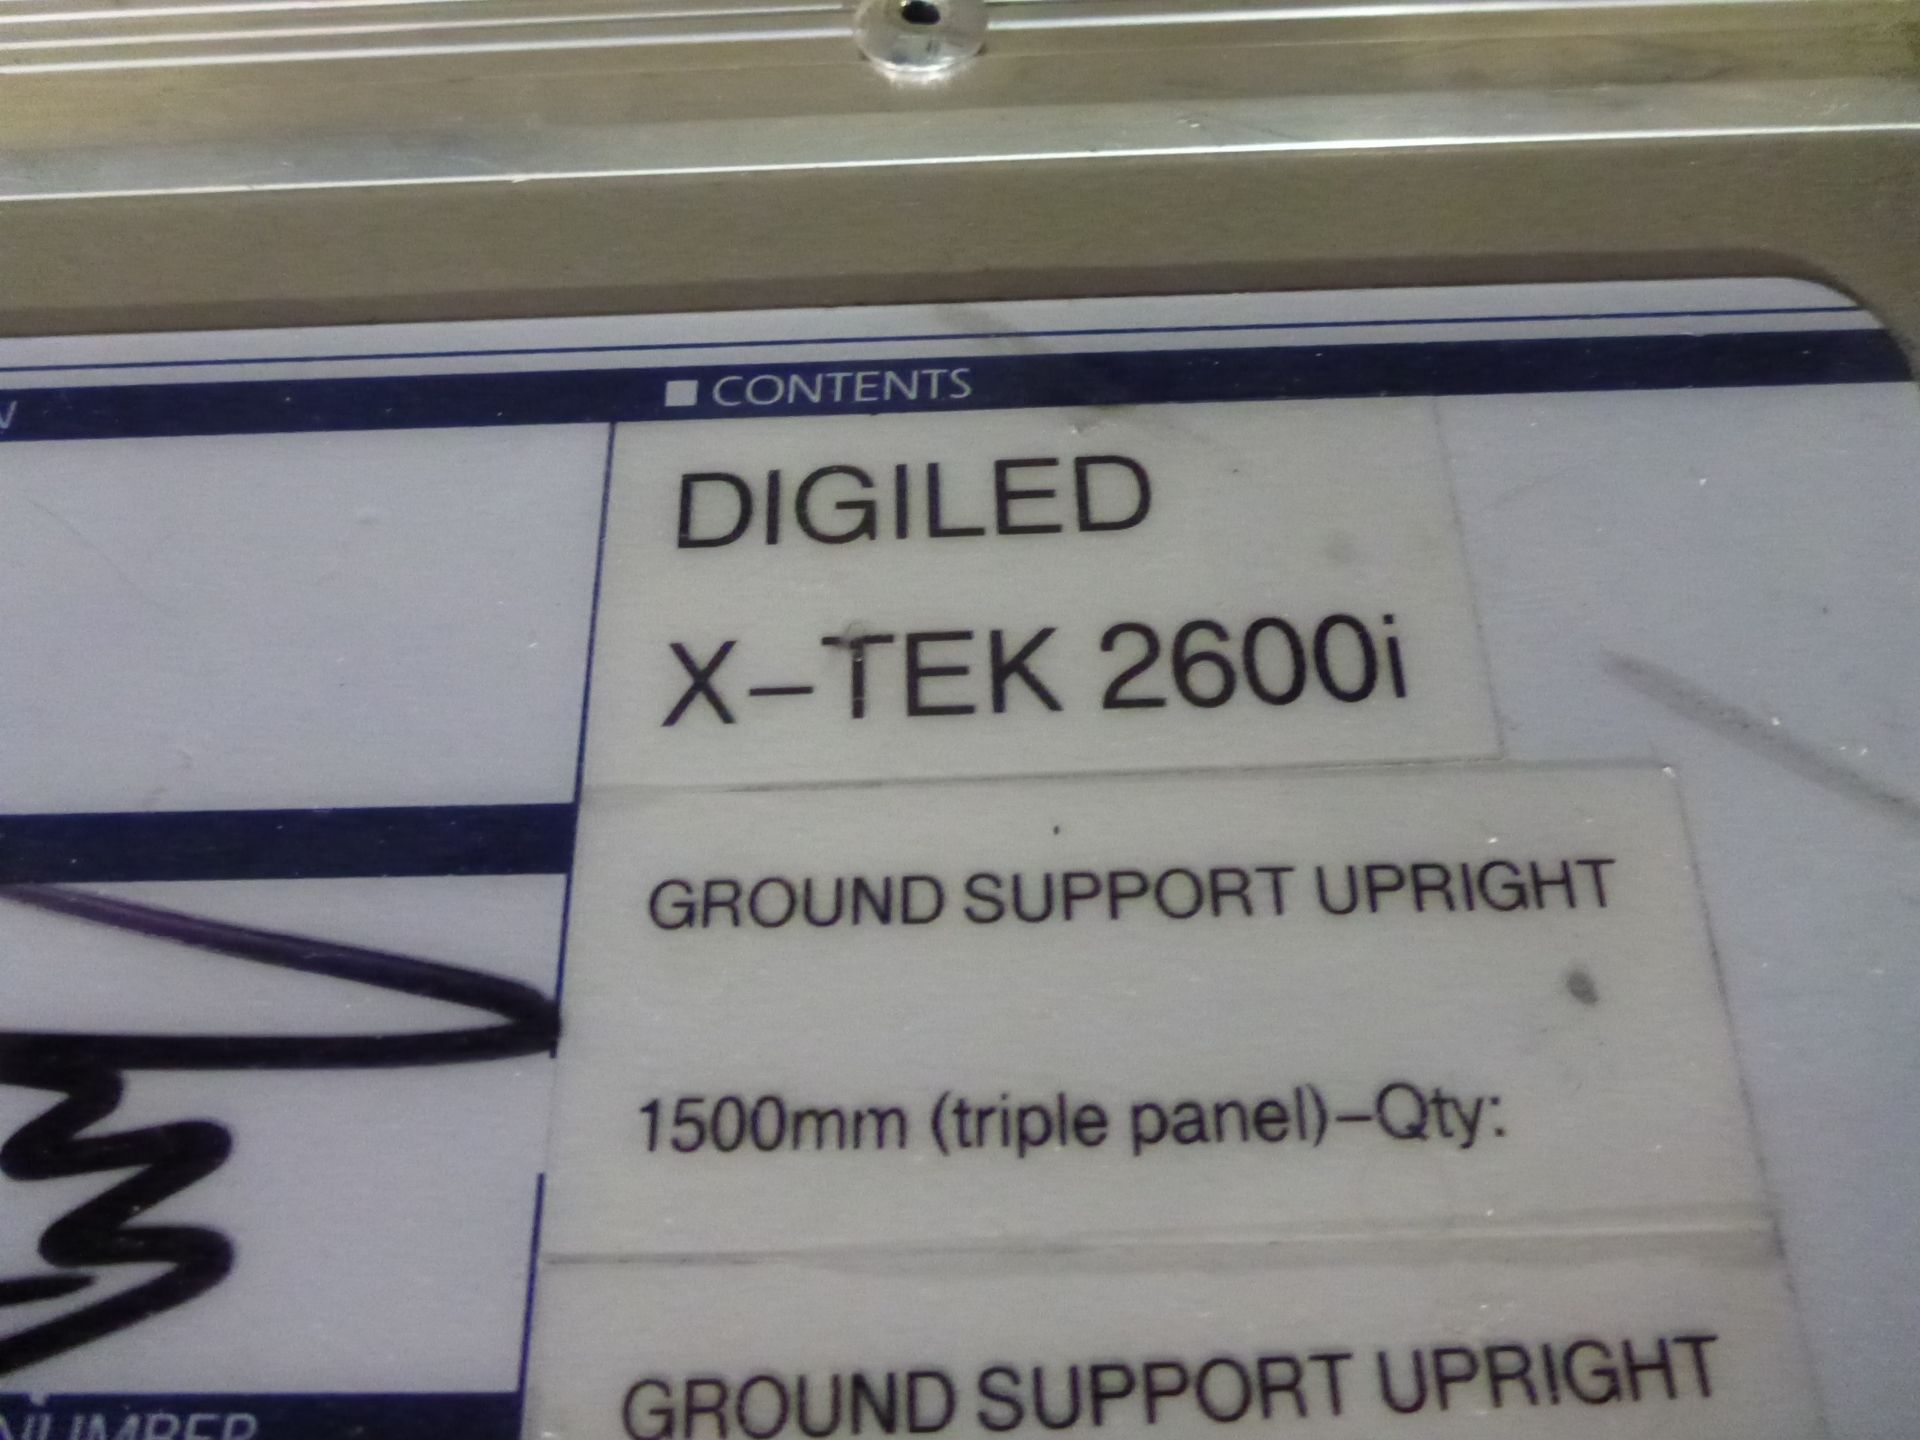 DigiLED X-Tek 2600i Ground Support Uprights 1500 mm triple panel, Qty 10 including couplers, In - Image 4 of 5